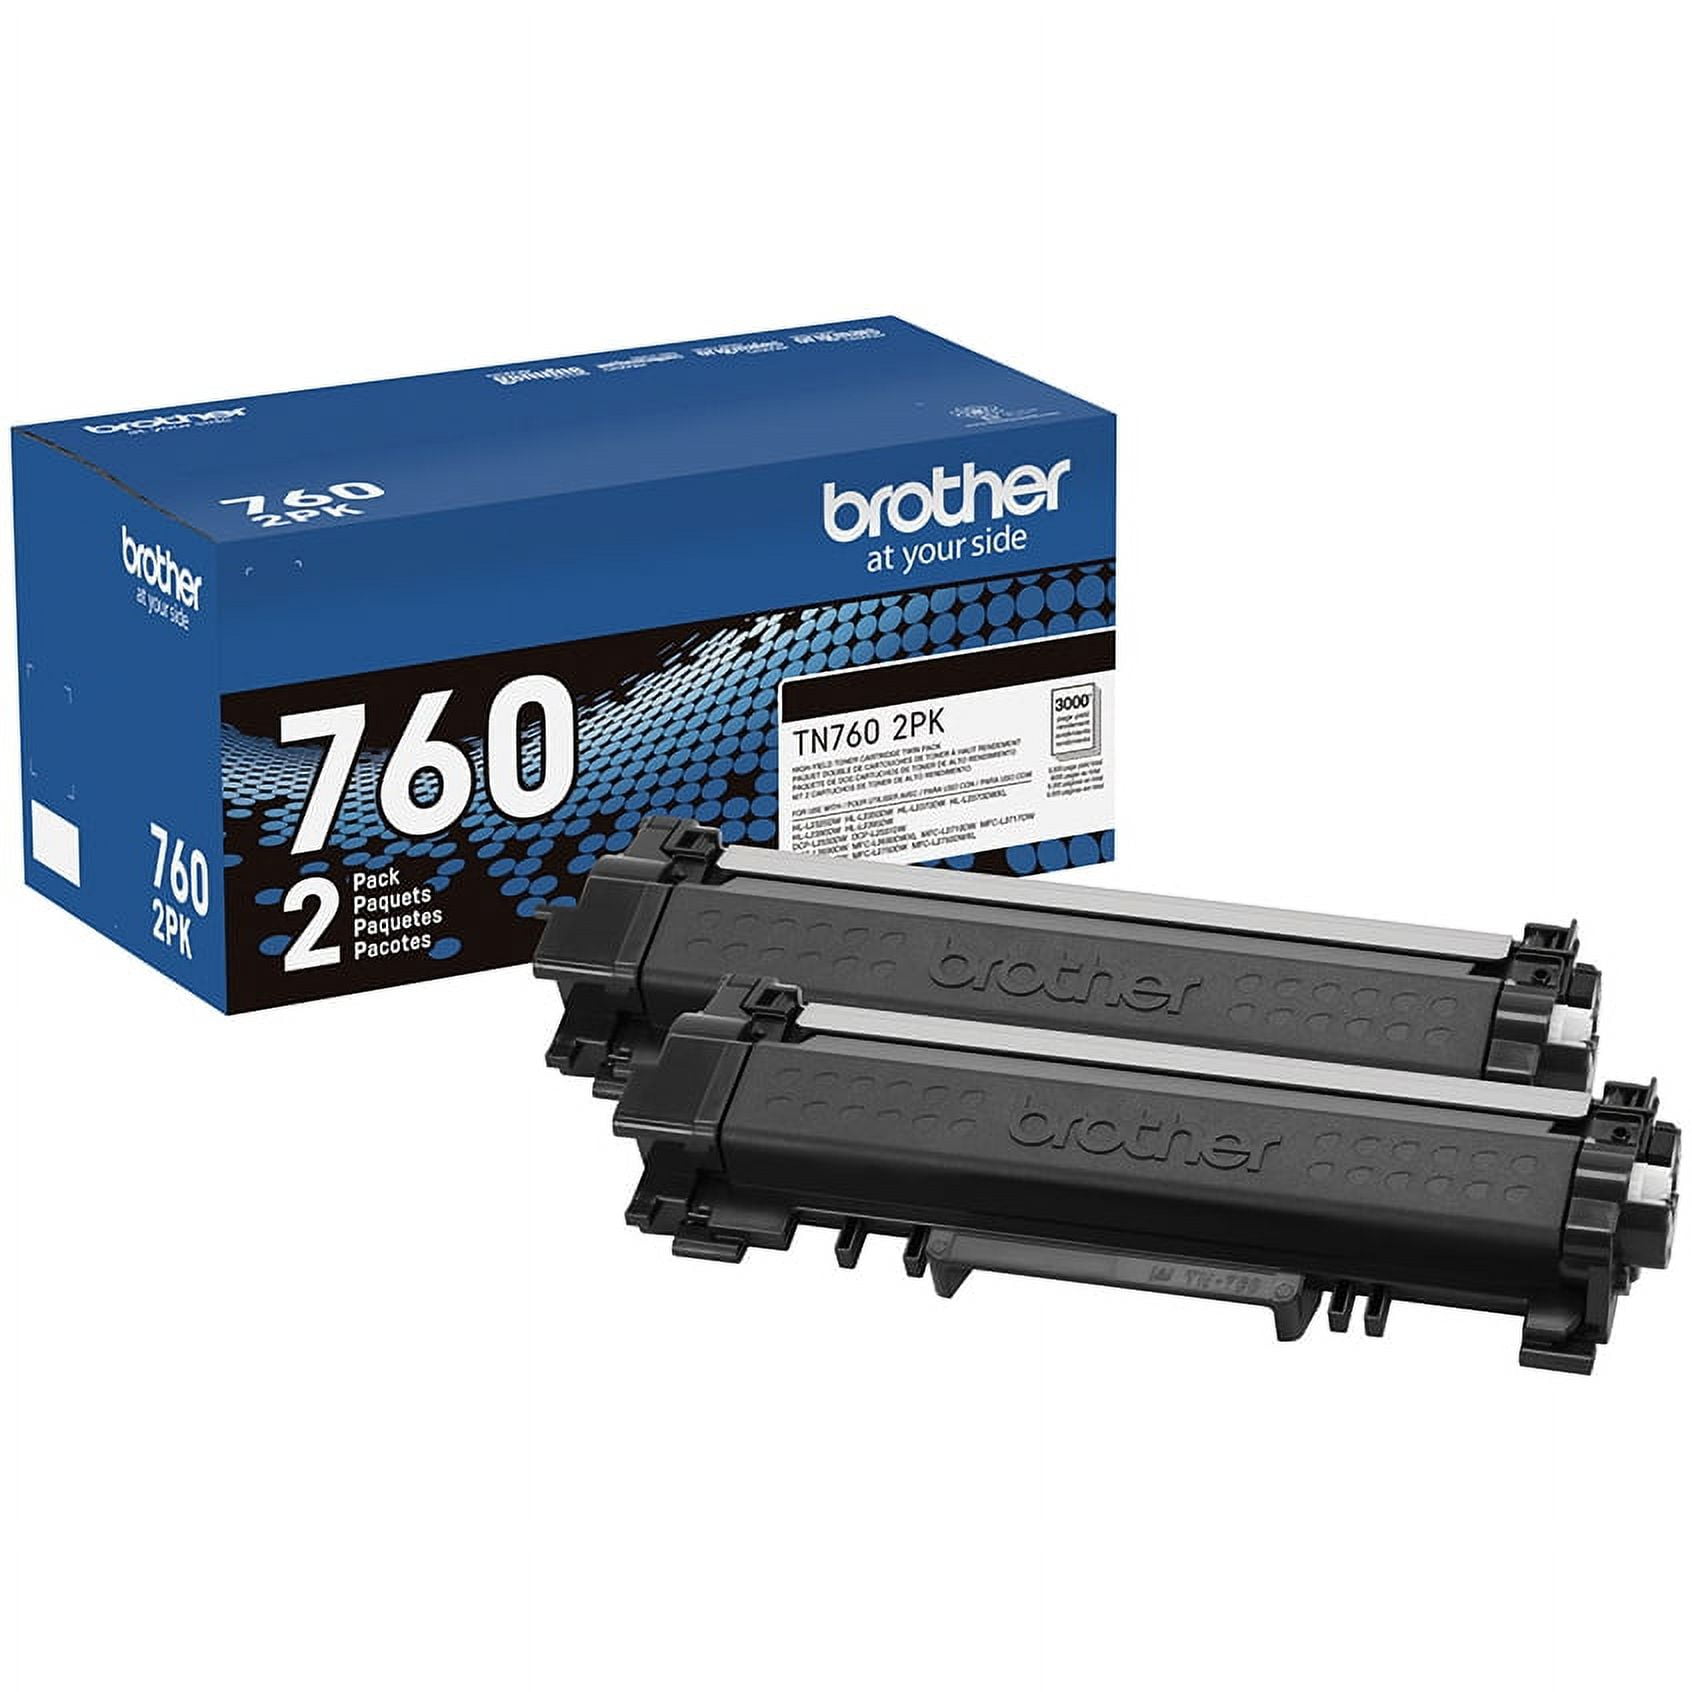 Compatible toner cartridge for BROTHER TN-241 TN-245 - Printing Saver